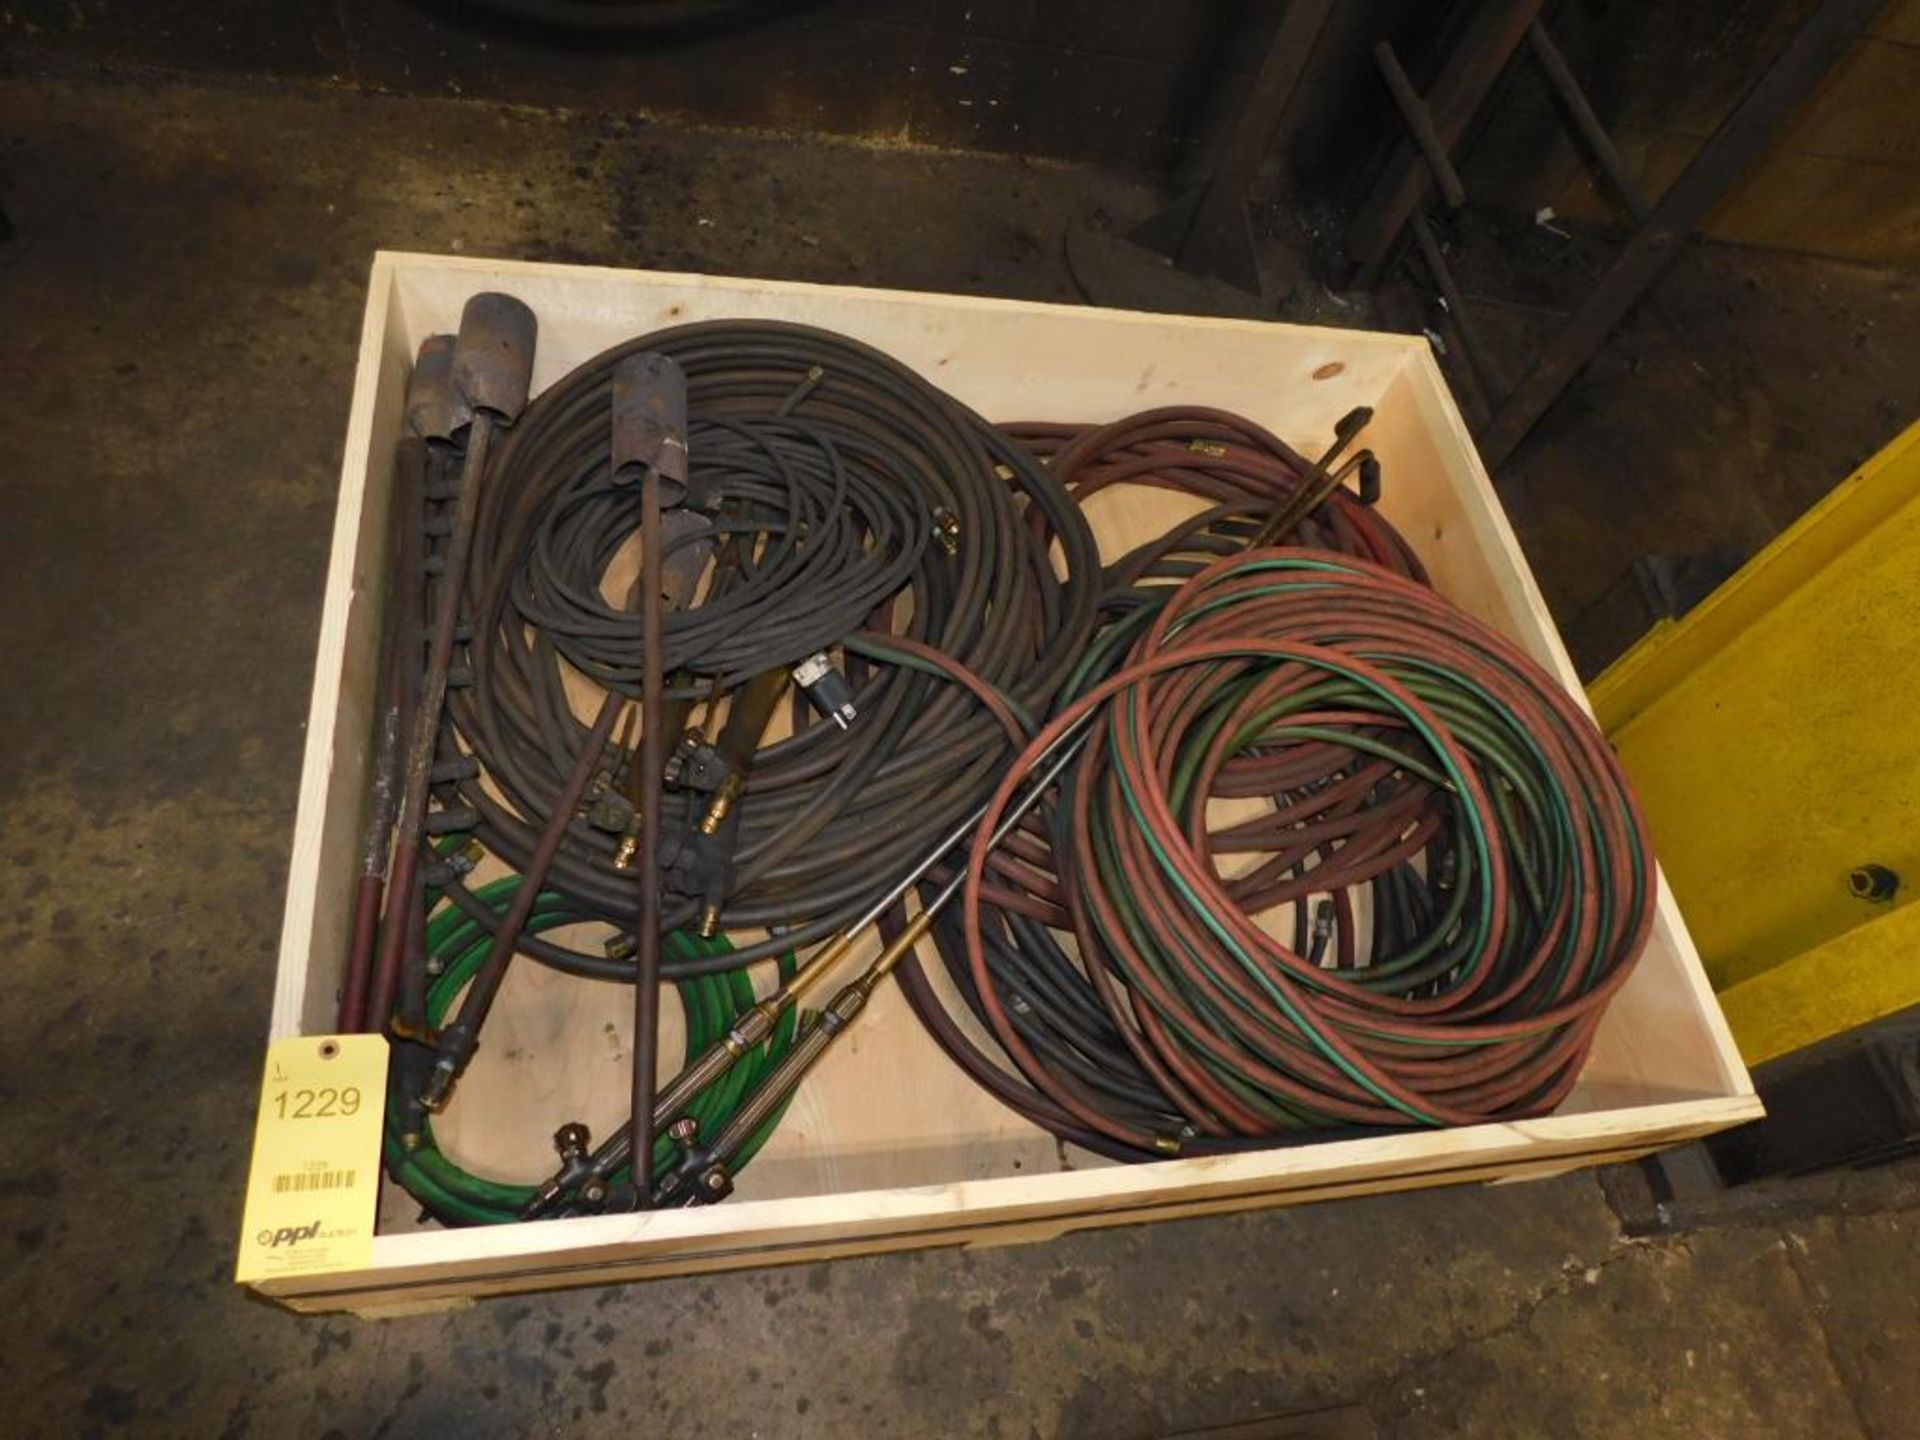 LOT: Assorted Torch Burners, Torches, Hosing in Crate